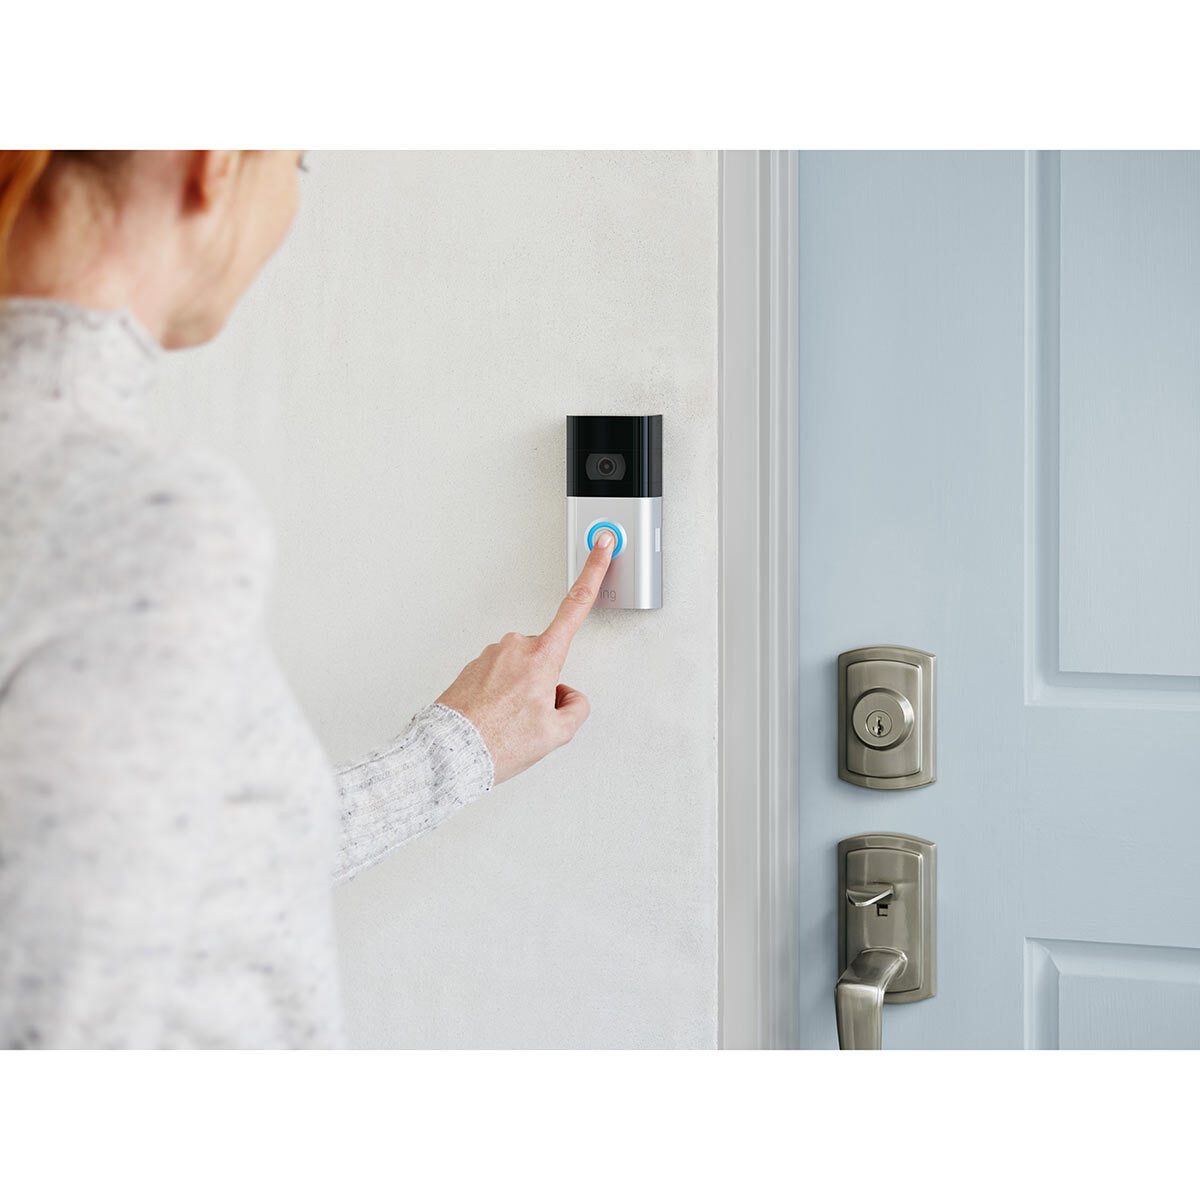 Ring Video Doorbell 3 with Chime - Signature Retail Stores